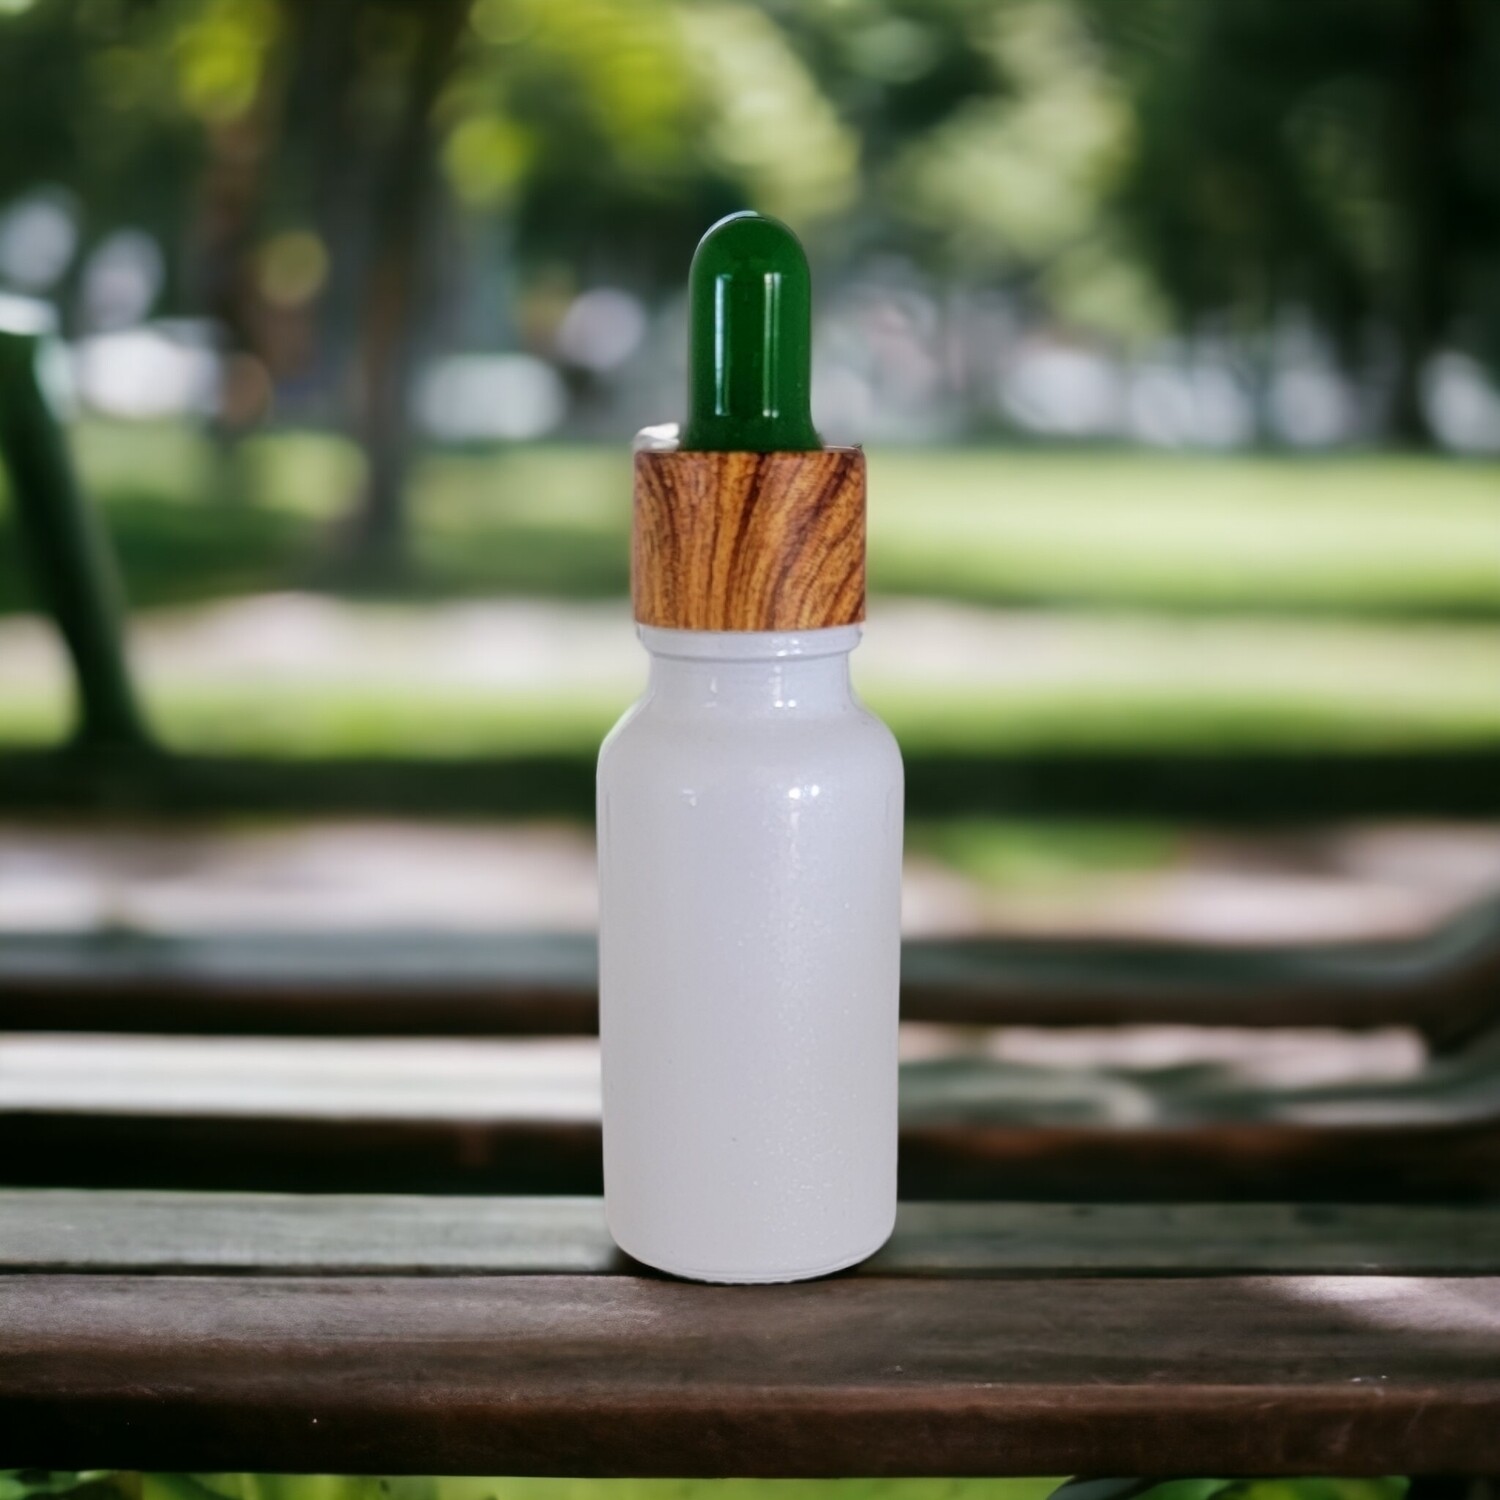 20mL WHITE PEARL (Coated) glass dropper bottle with GREEN TEAT & IMITATION TIMBER CAP